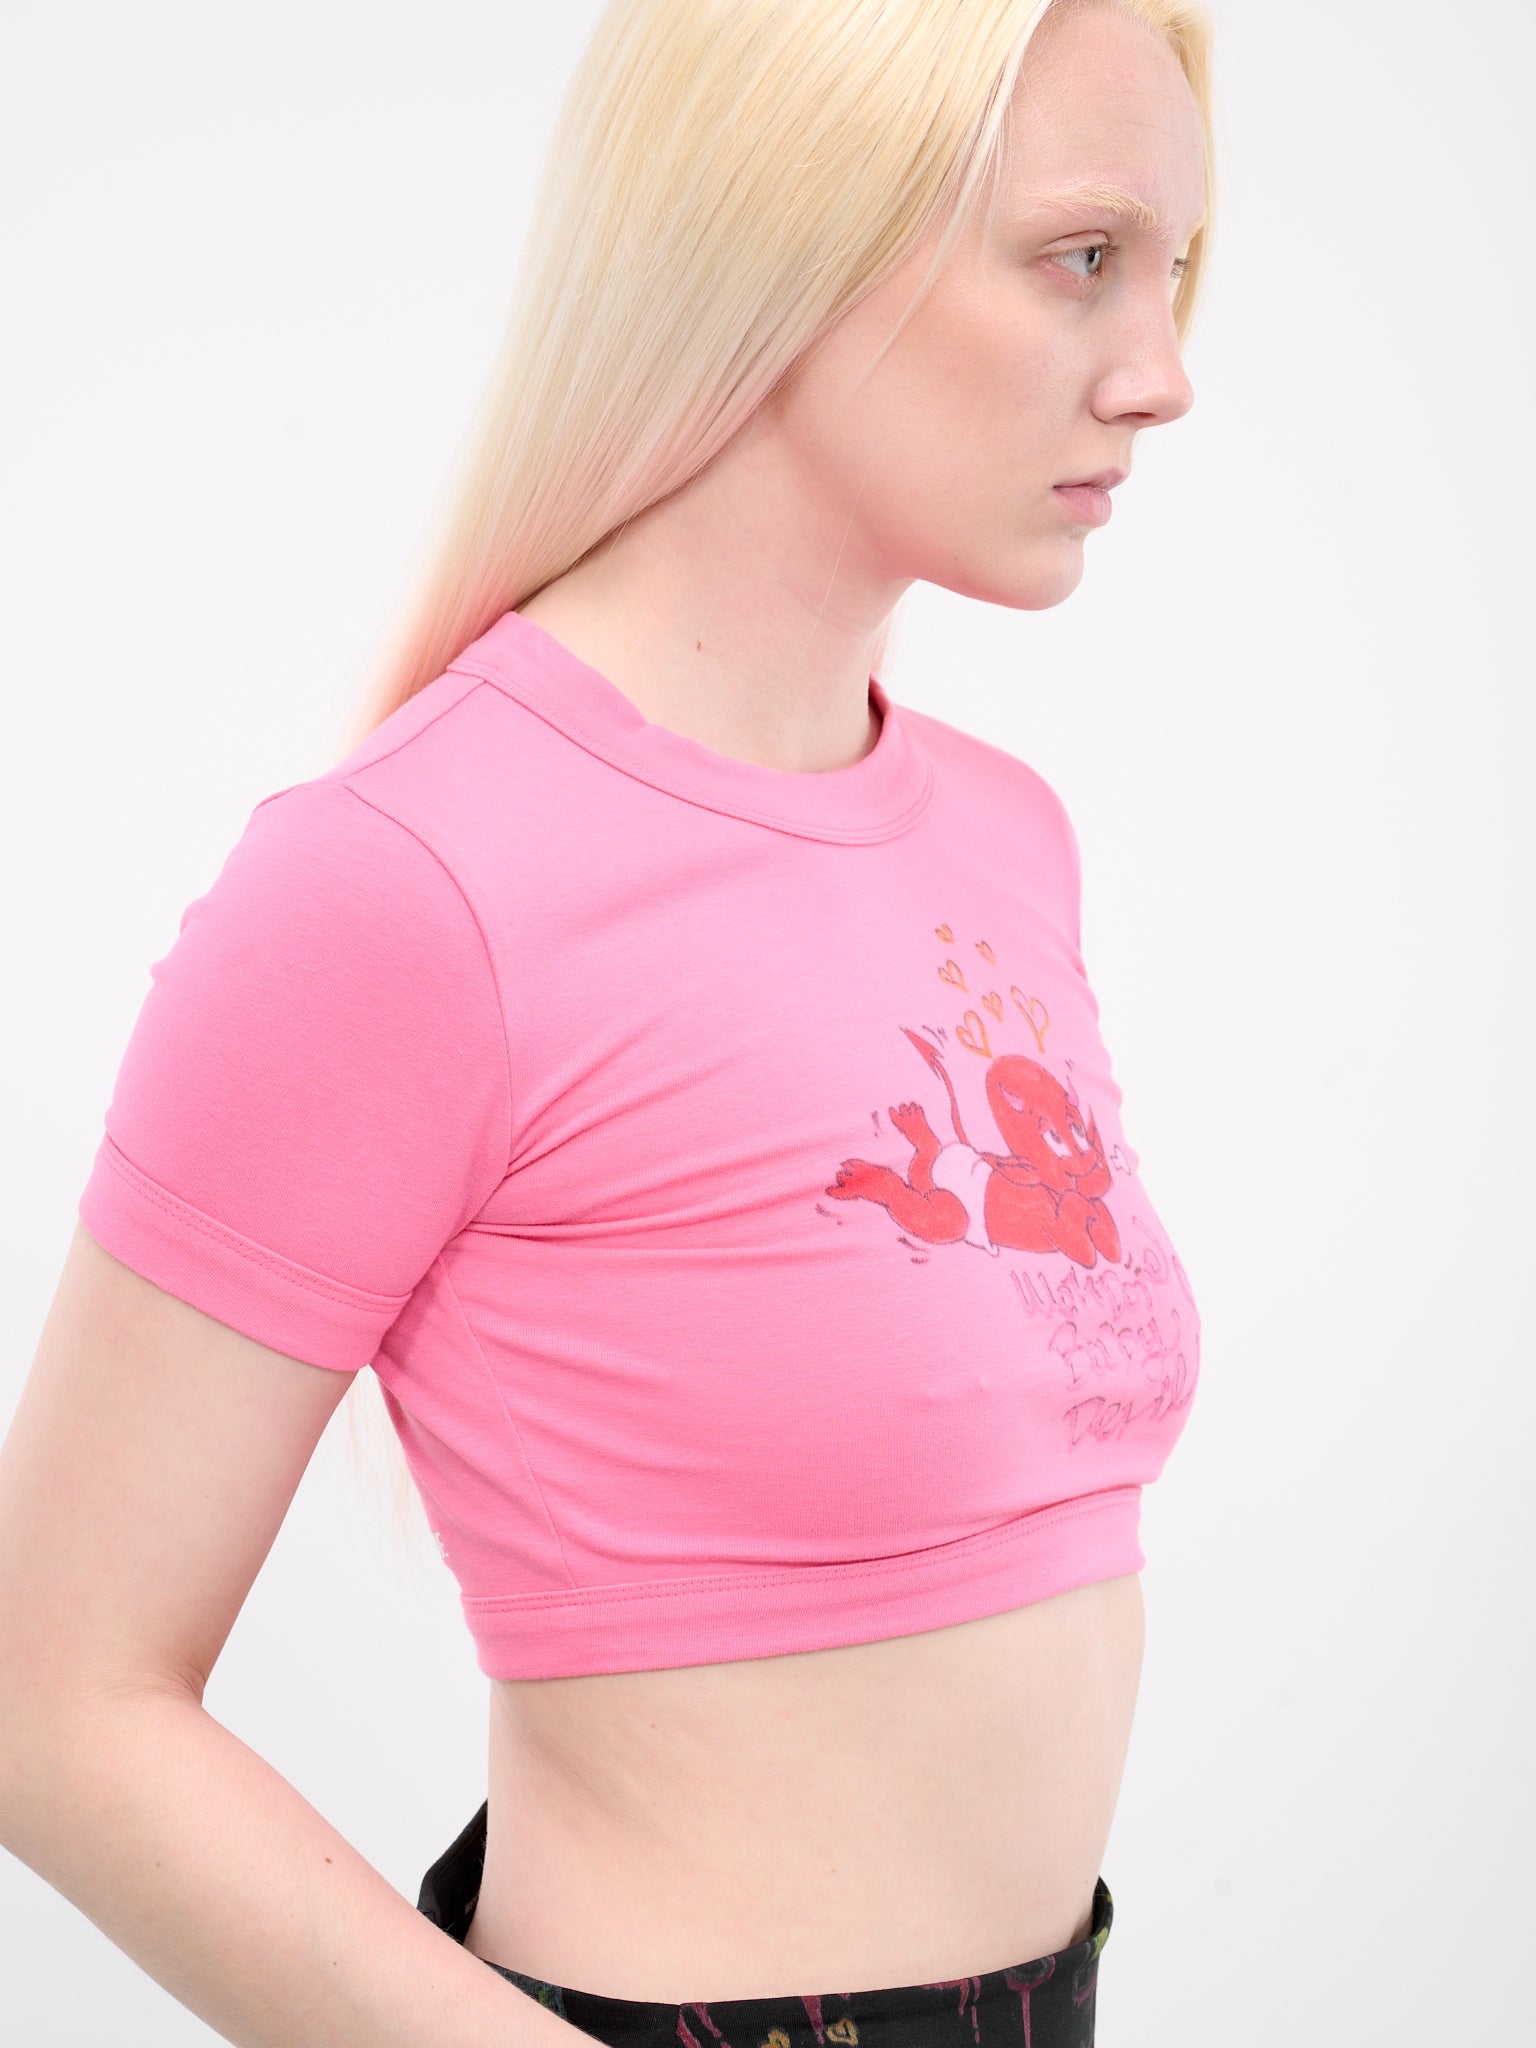 Cropped Doodle Graphic Tee (TT1-24-735-W-PINK)